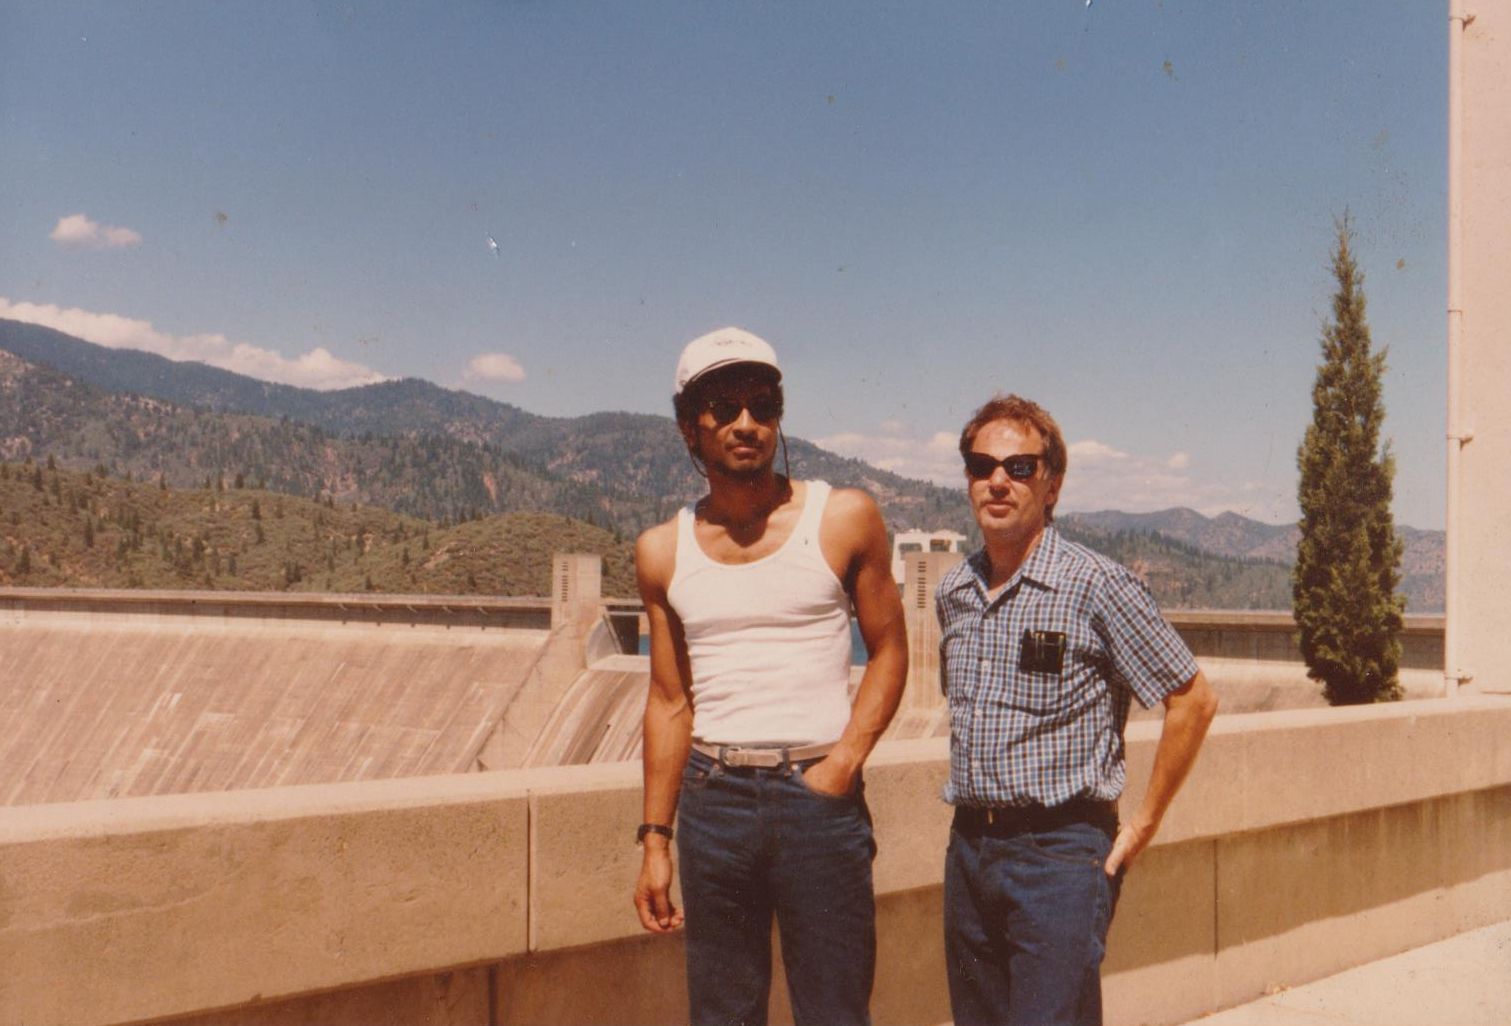 Me & Bobby - Expo '86 bound - Shasta Dam, CA (Happy then, happy now--over 34 years together, and counting!).jpg